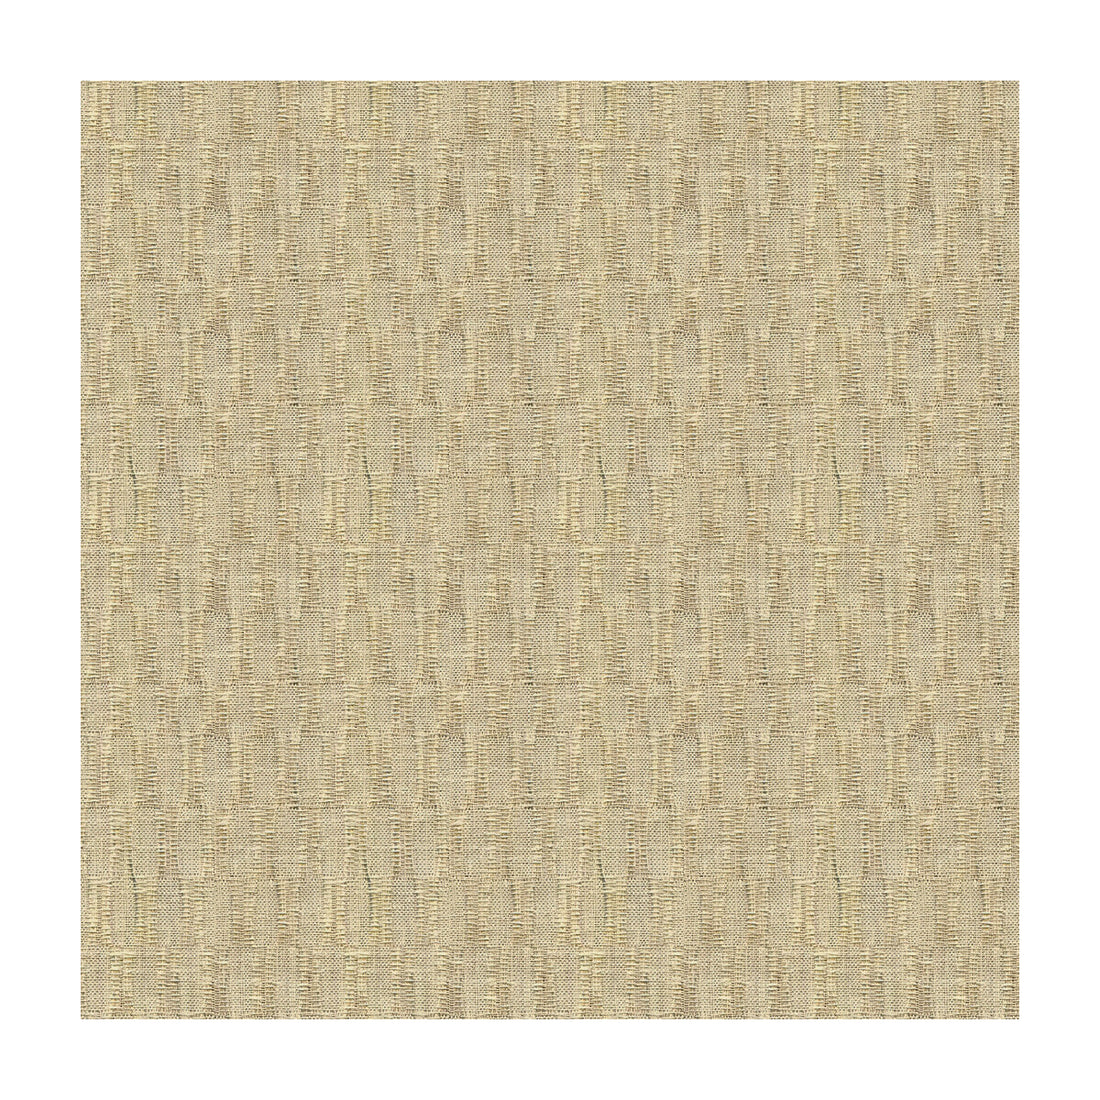 Kravet Contract fabric in 4163-106 color - pattern 4163.106.0 - by Kravet Contract